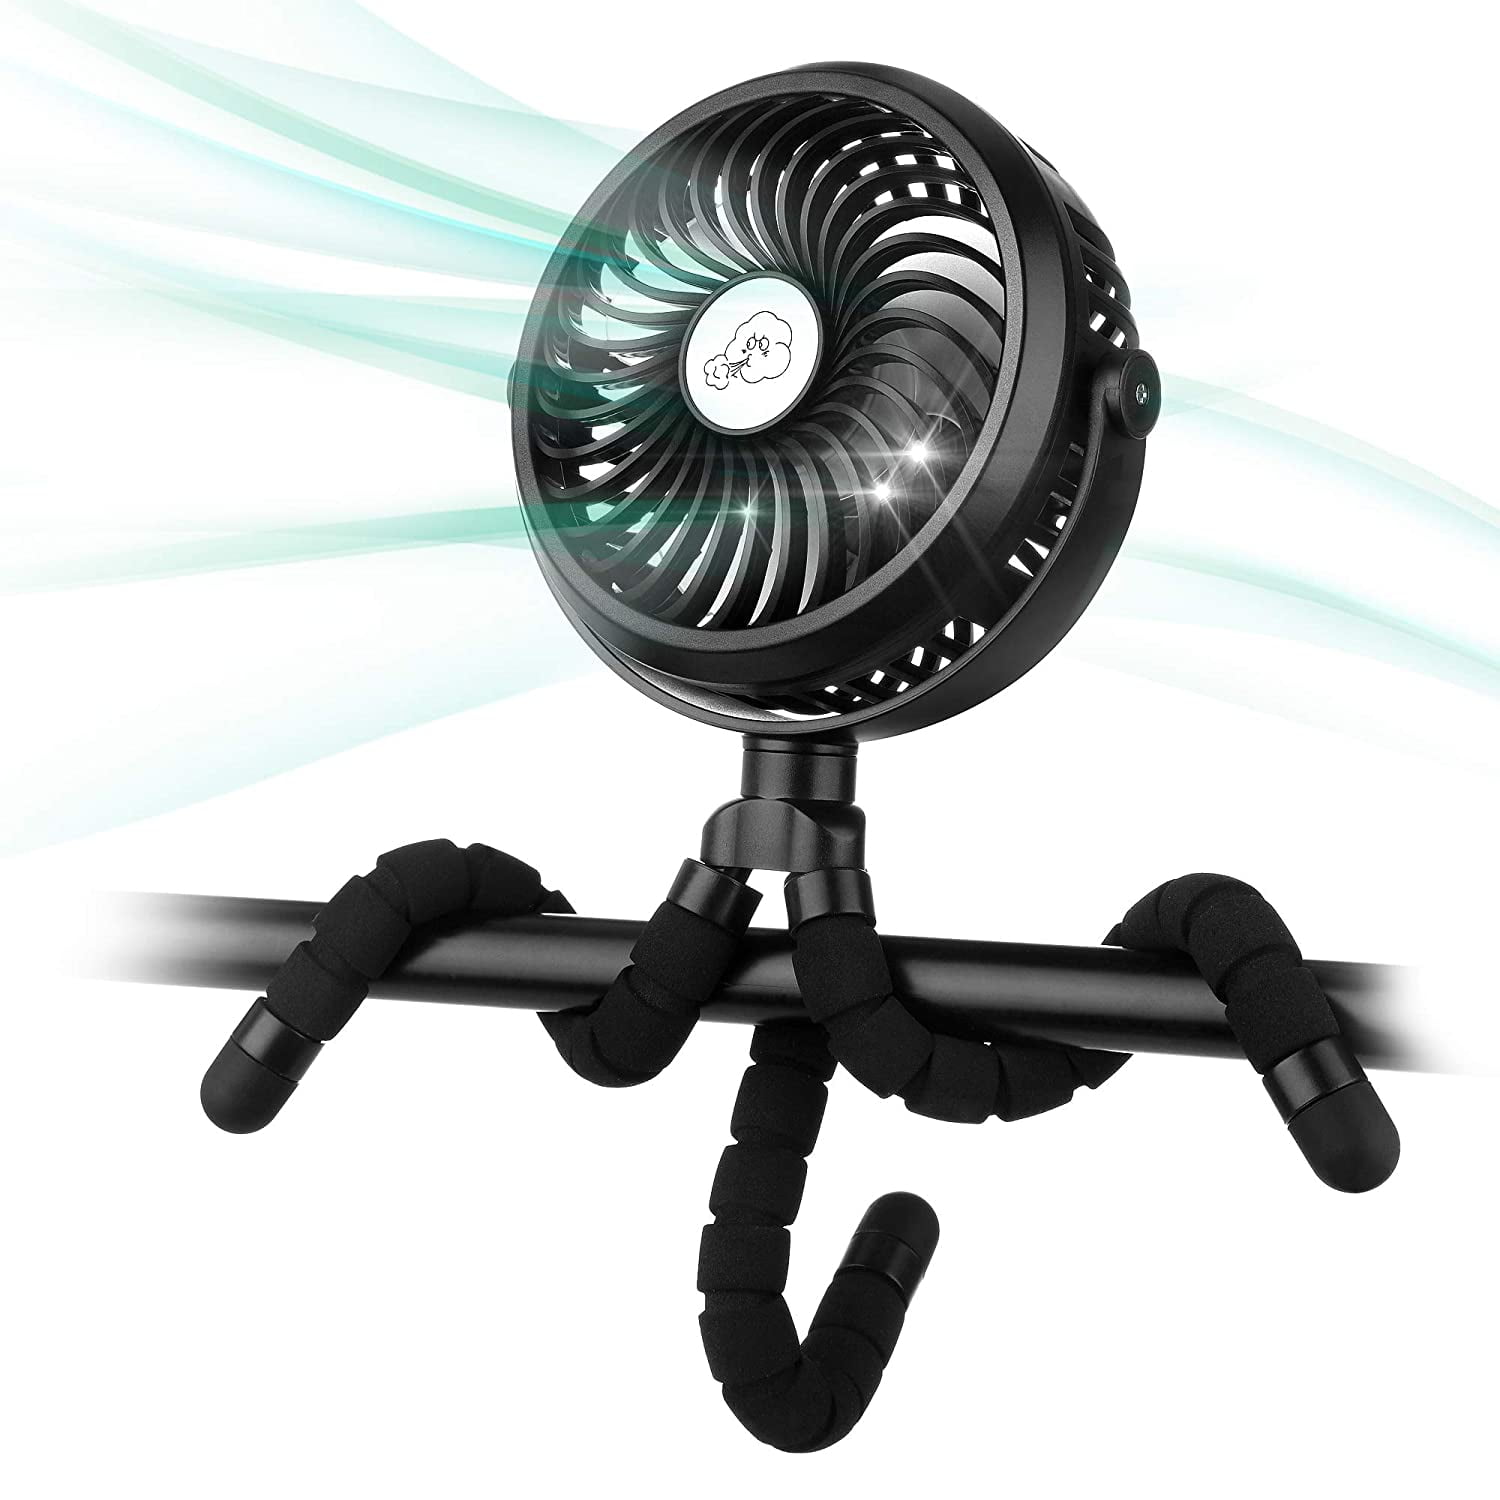 Quiet Stroller Fan with 3 Speed and Brightness Settings Towkka Portable Camping Fan with Led Lights 4 in 1 Rechargeable 5000mAh USB Desk Oscillating Fan 